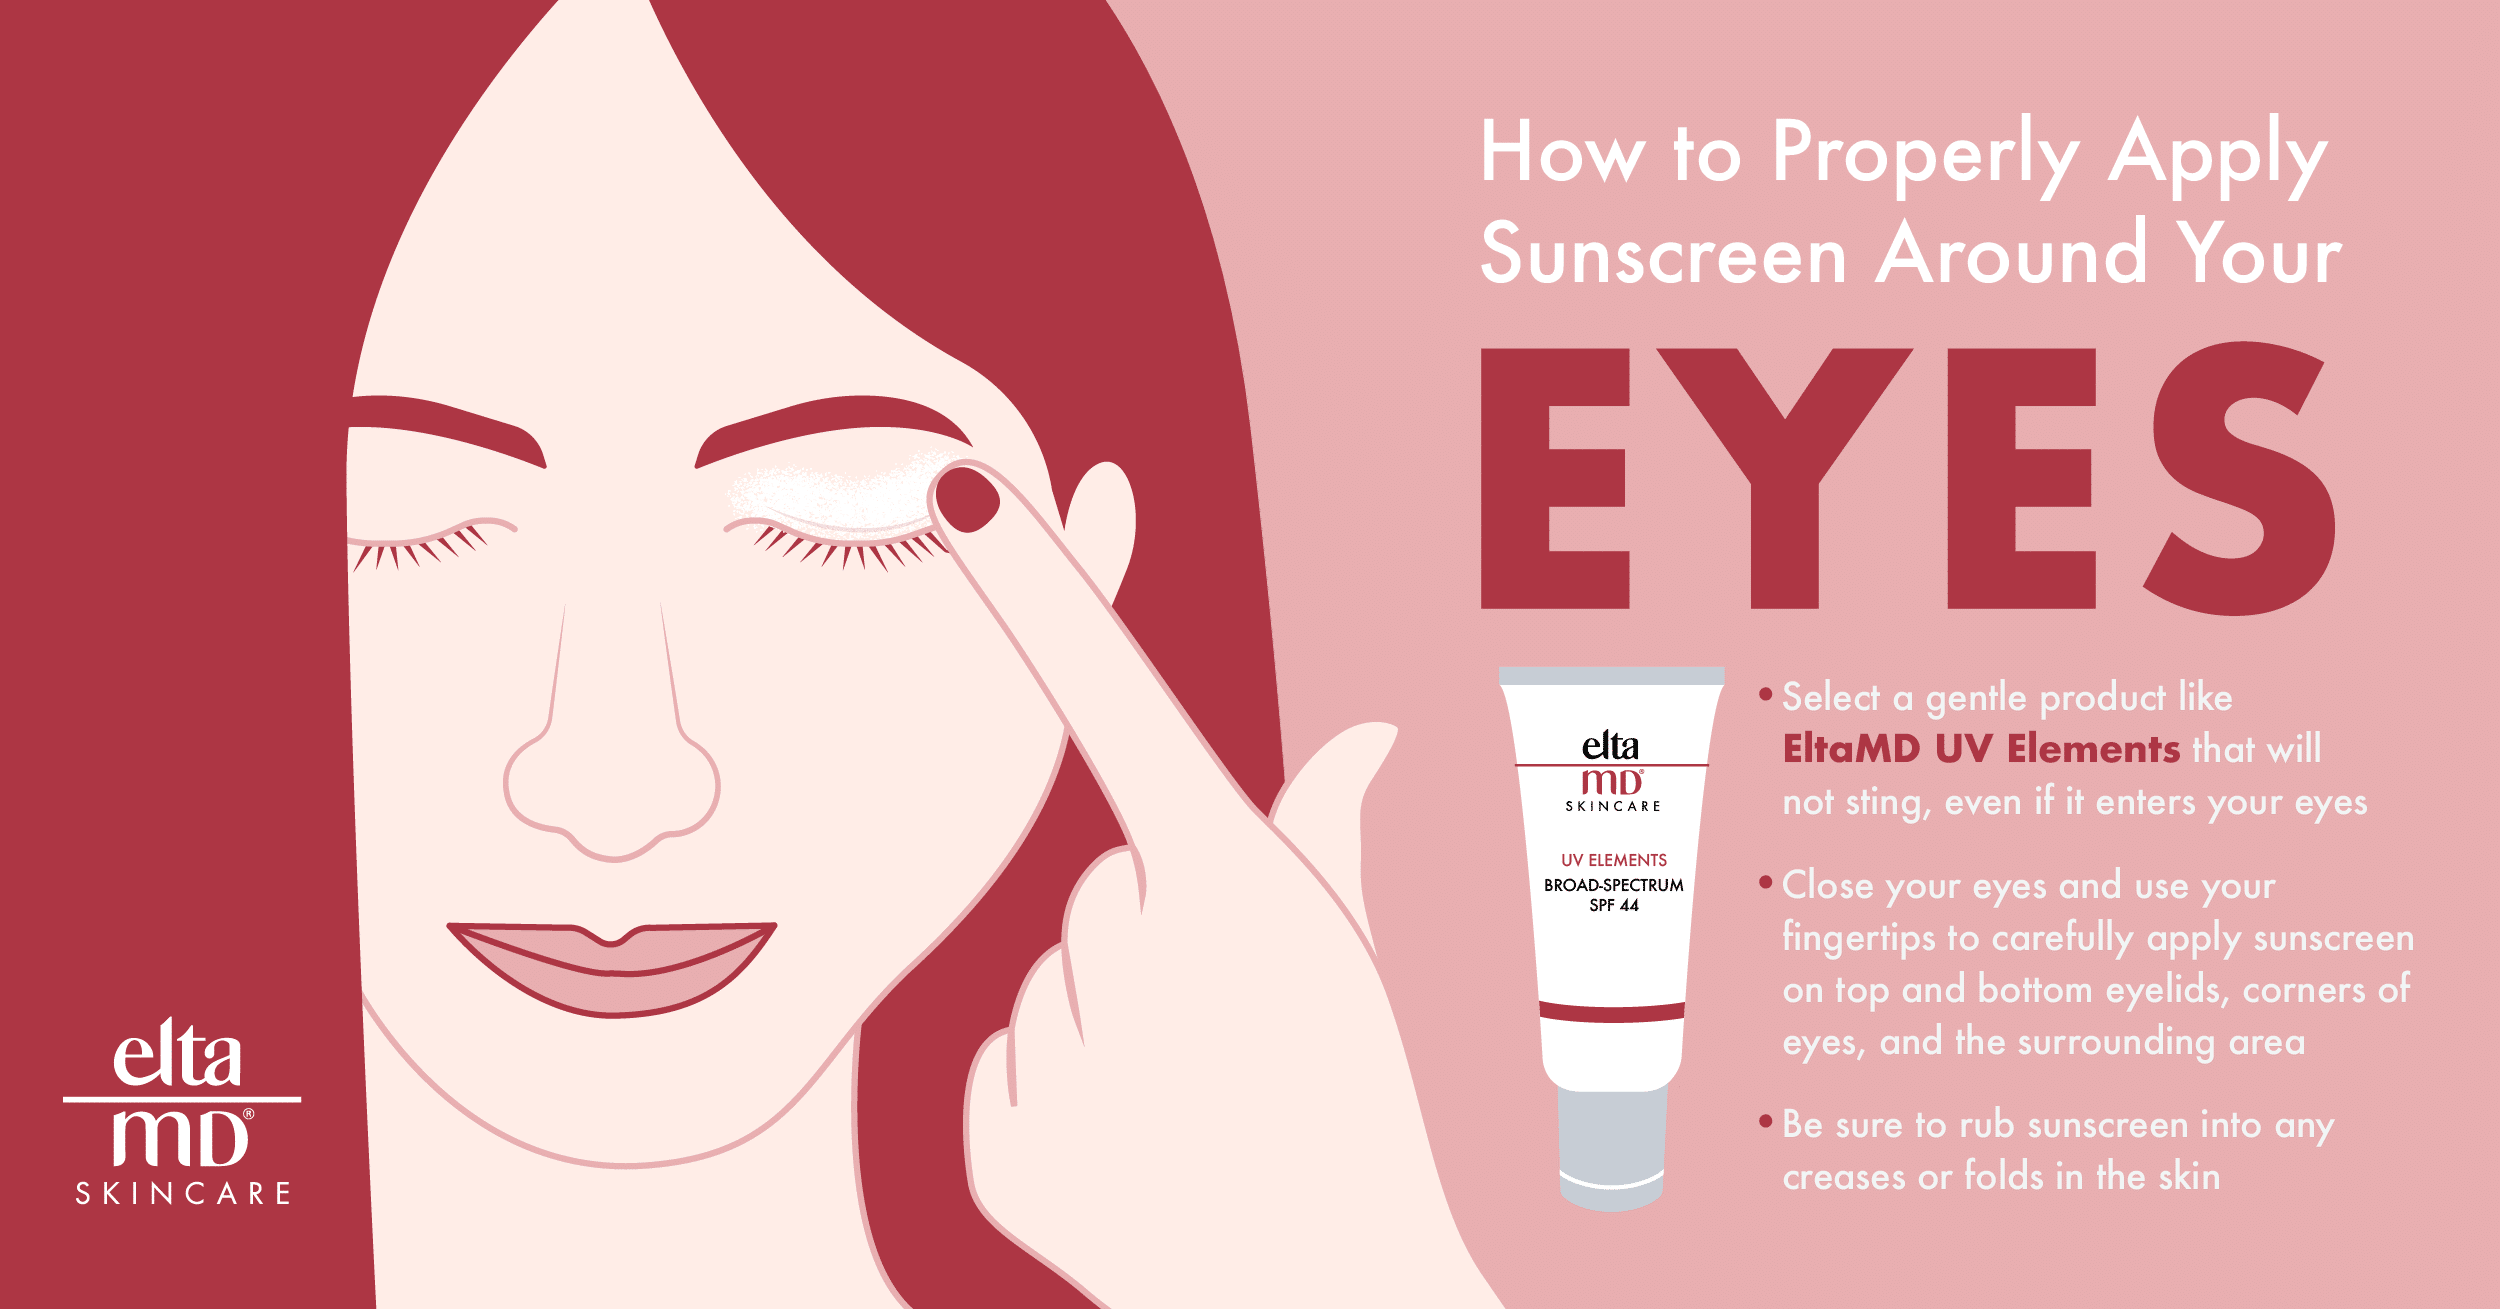 How to Properly Apply Sunscreen Around Your Eyes